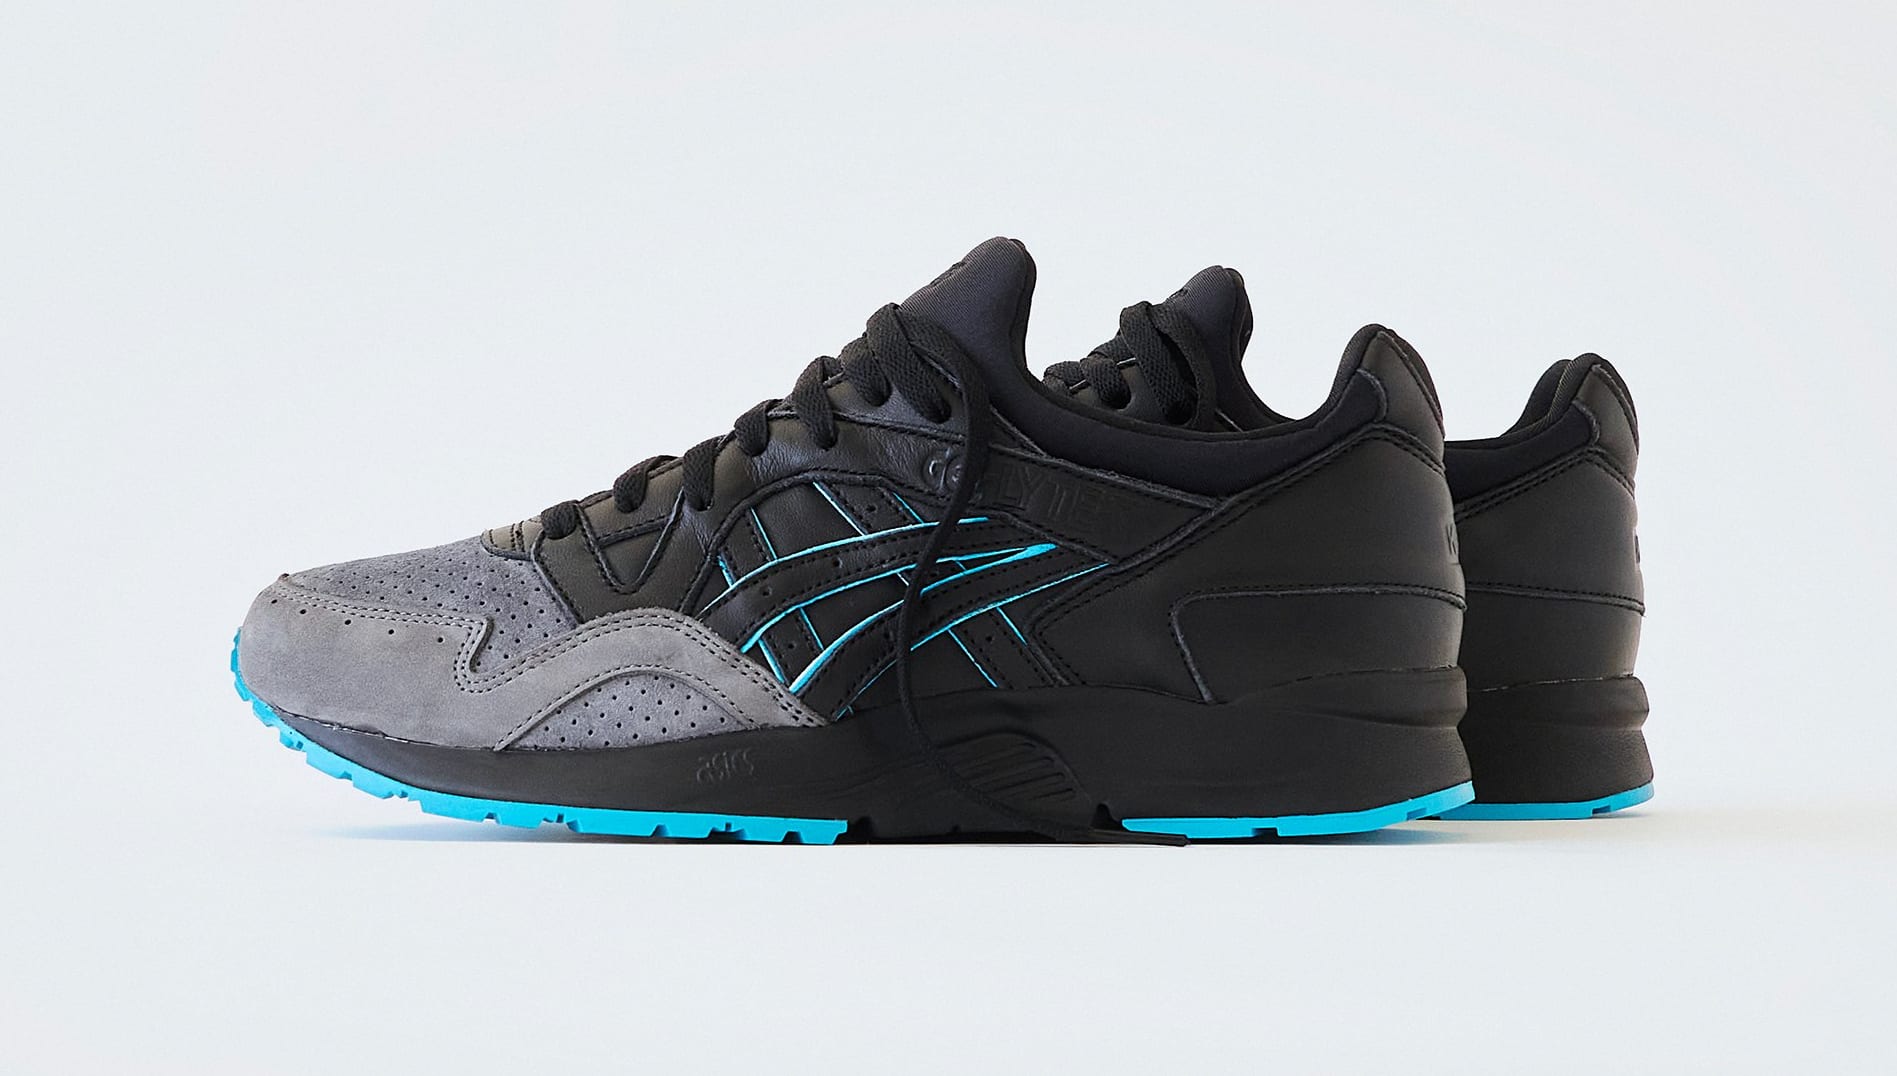 Ronnie Fieg Is Bringing Back 'Salmon Toe' and 'Leather Back' Asics